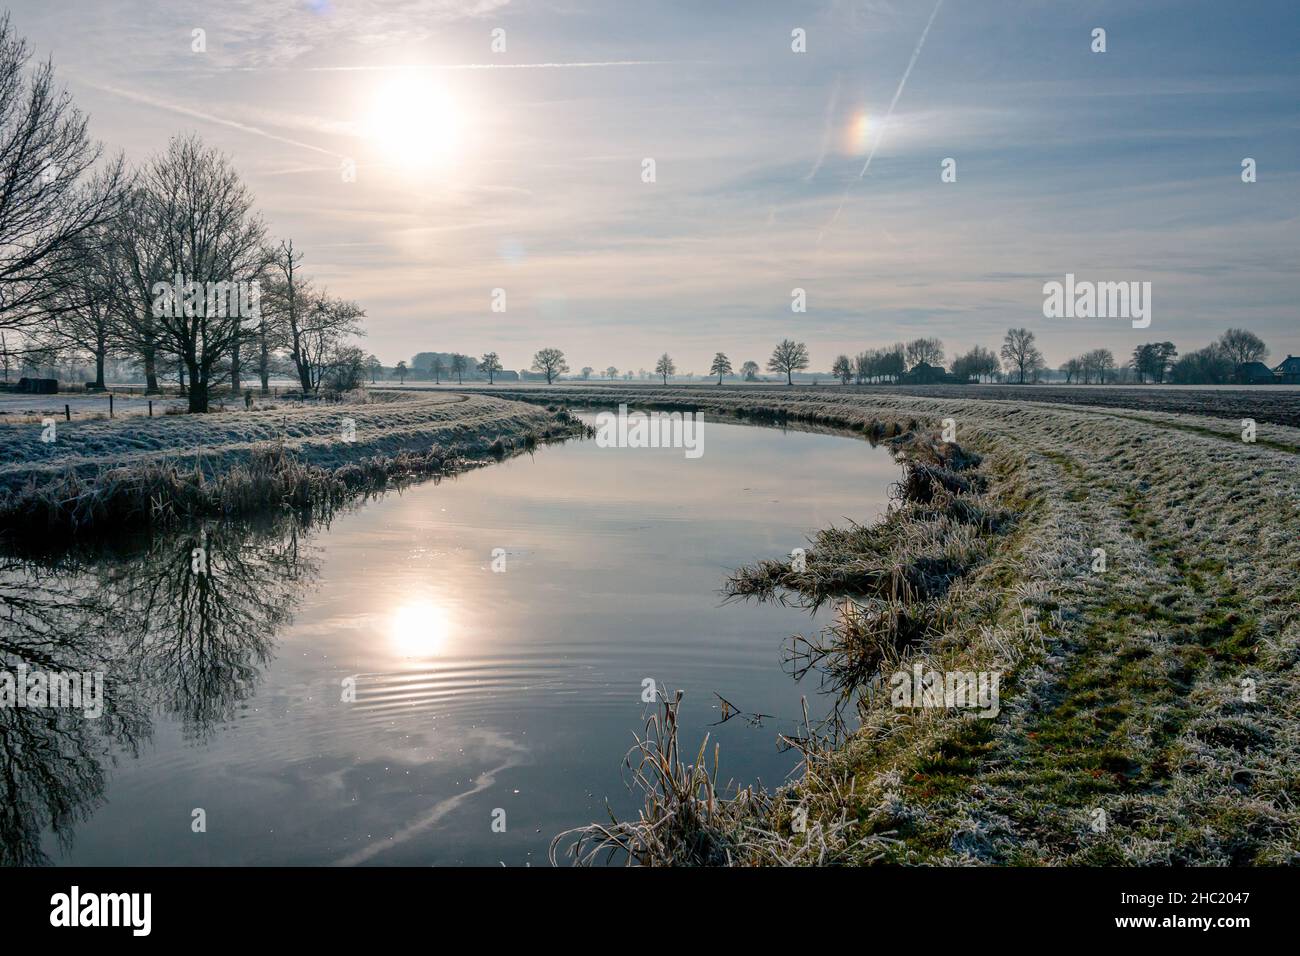 The flowing water in the canal 'the Soestwetering' in winter time with the frozen grass and reeds, near the village of Boerhaar in the province of Ove Stock Photo